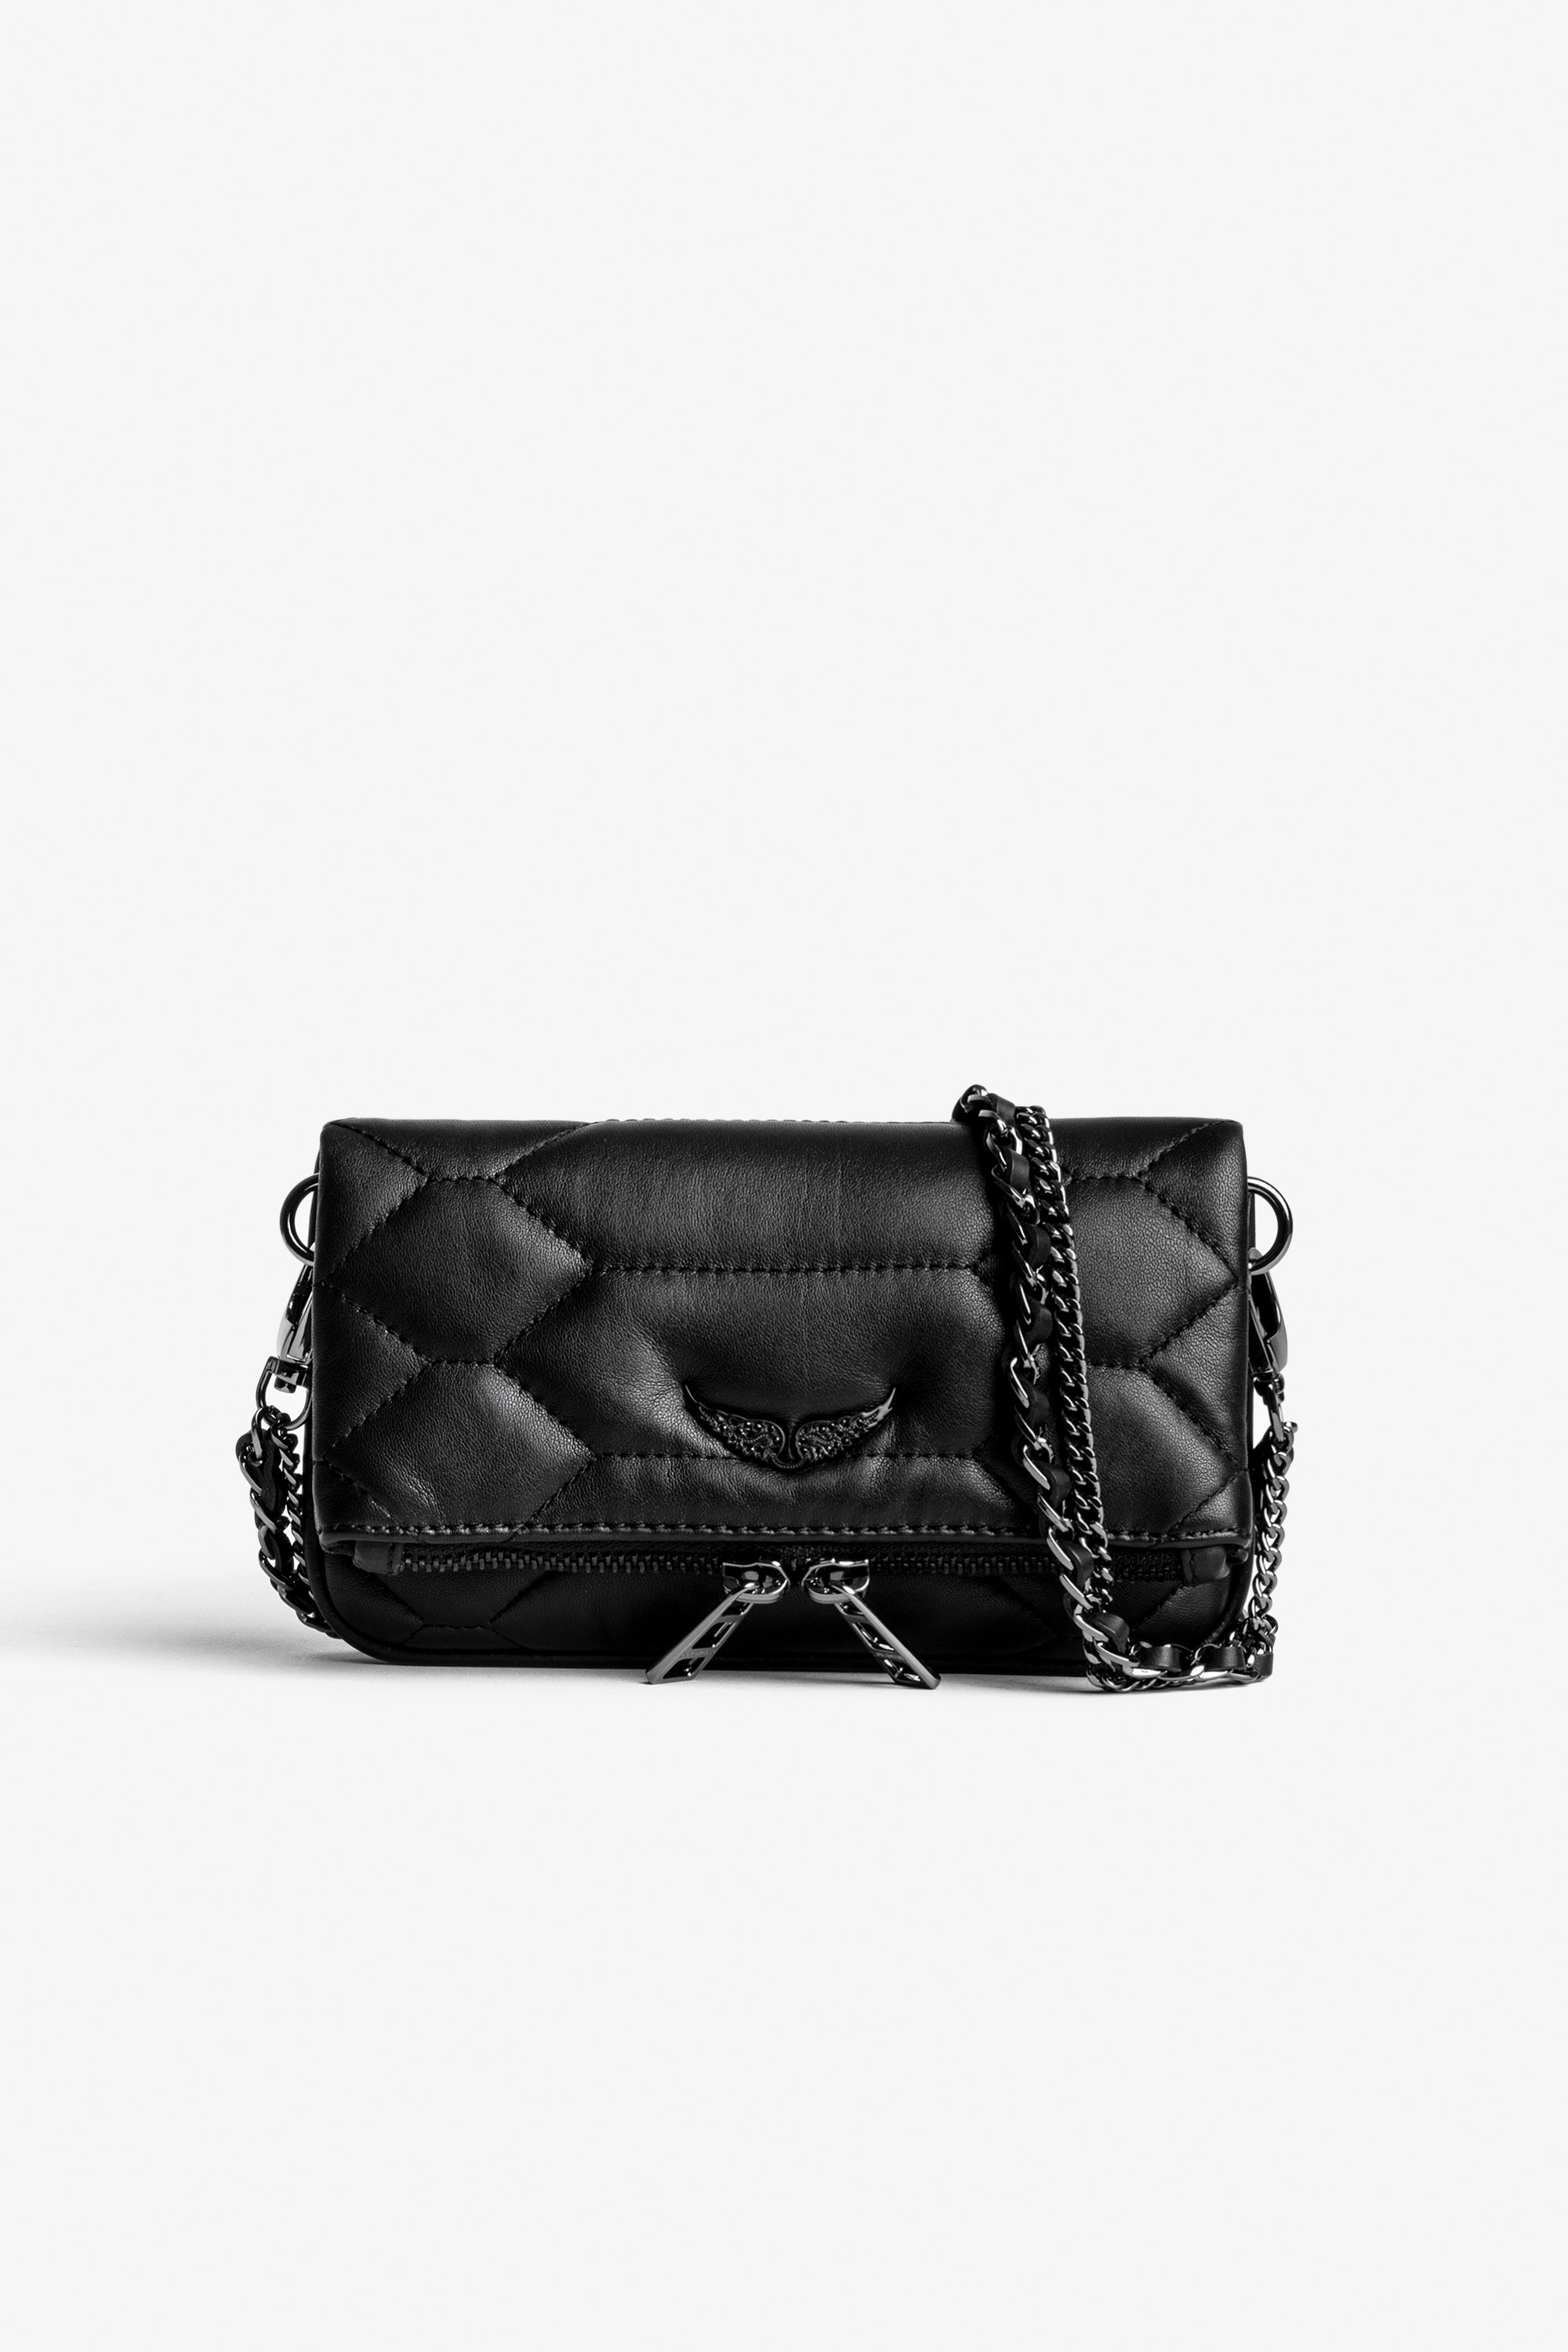 Rock Nano Quilted Leather Clutch Rock Nano iconic women’s black quilted leather clutch.